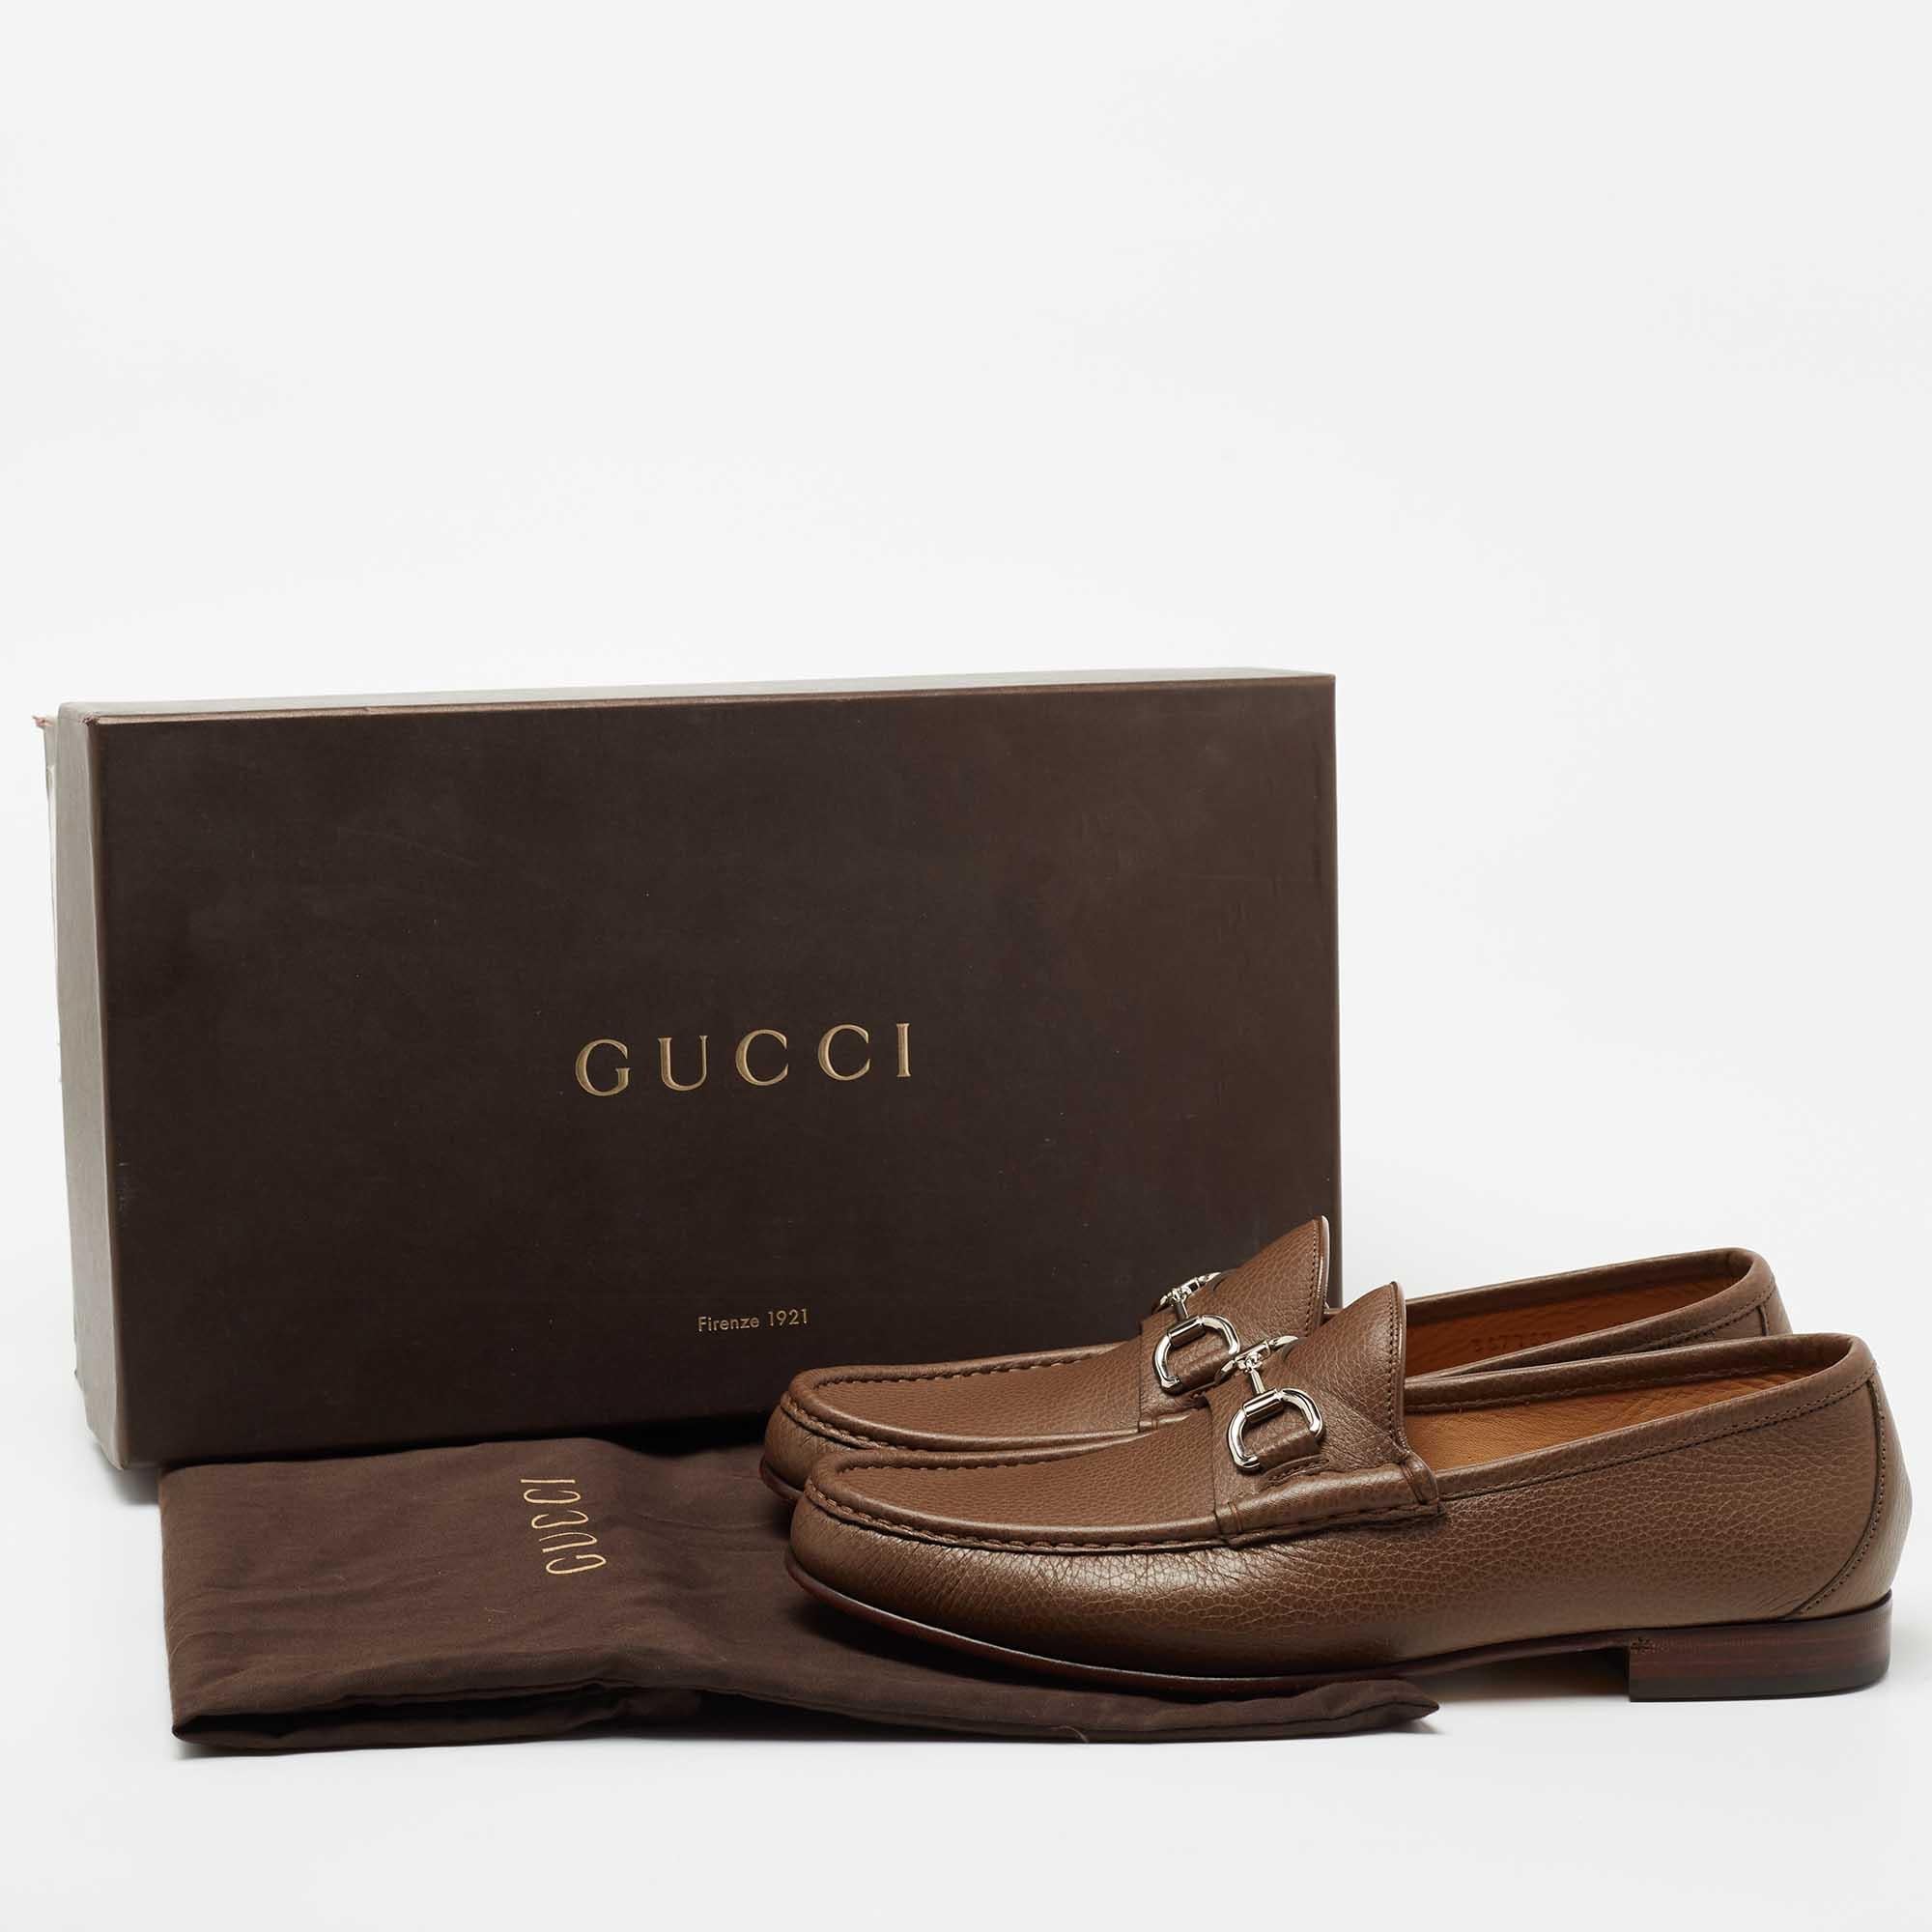 Gucci Brown Leather Horsebit Loafers Size 42 4